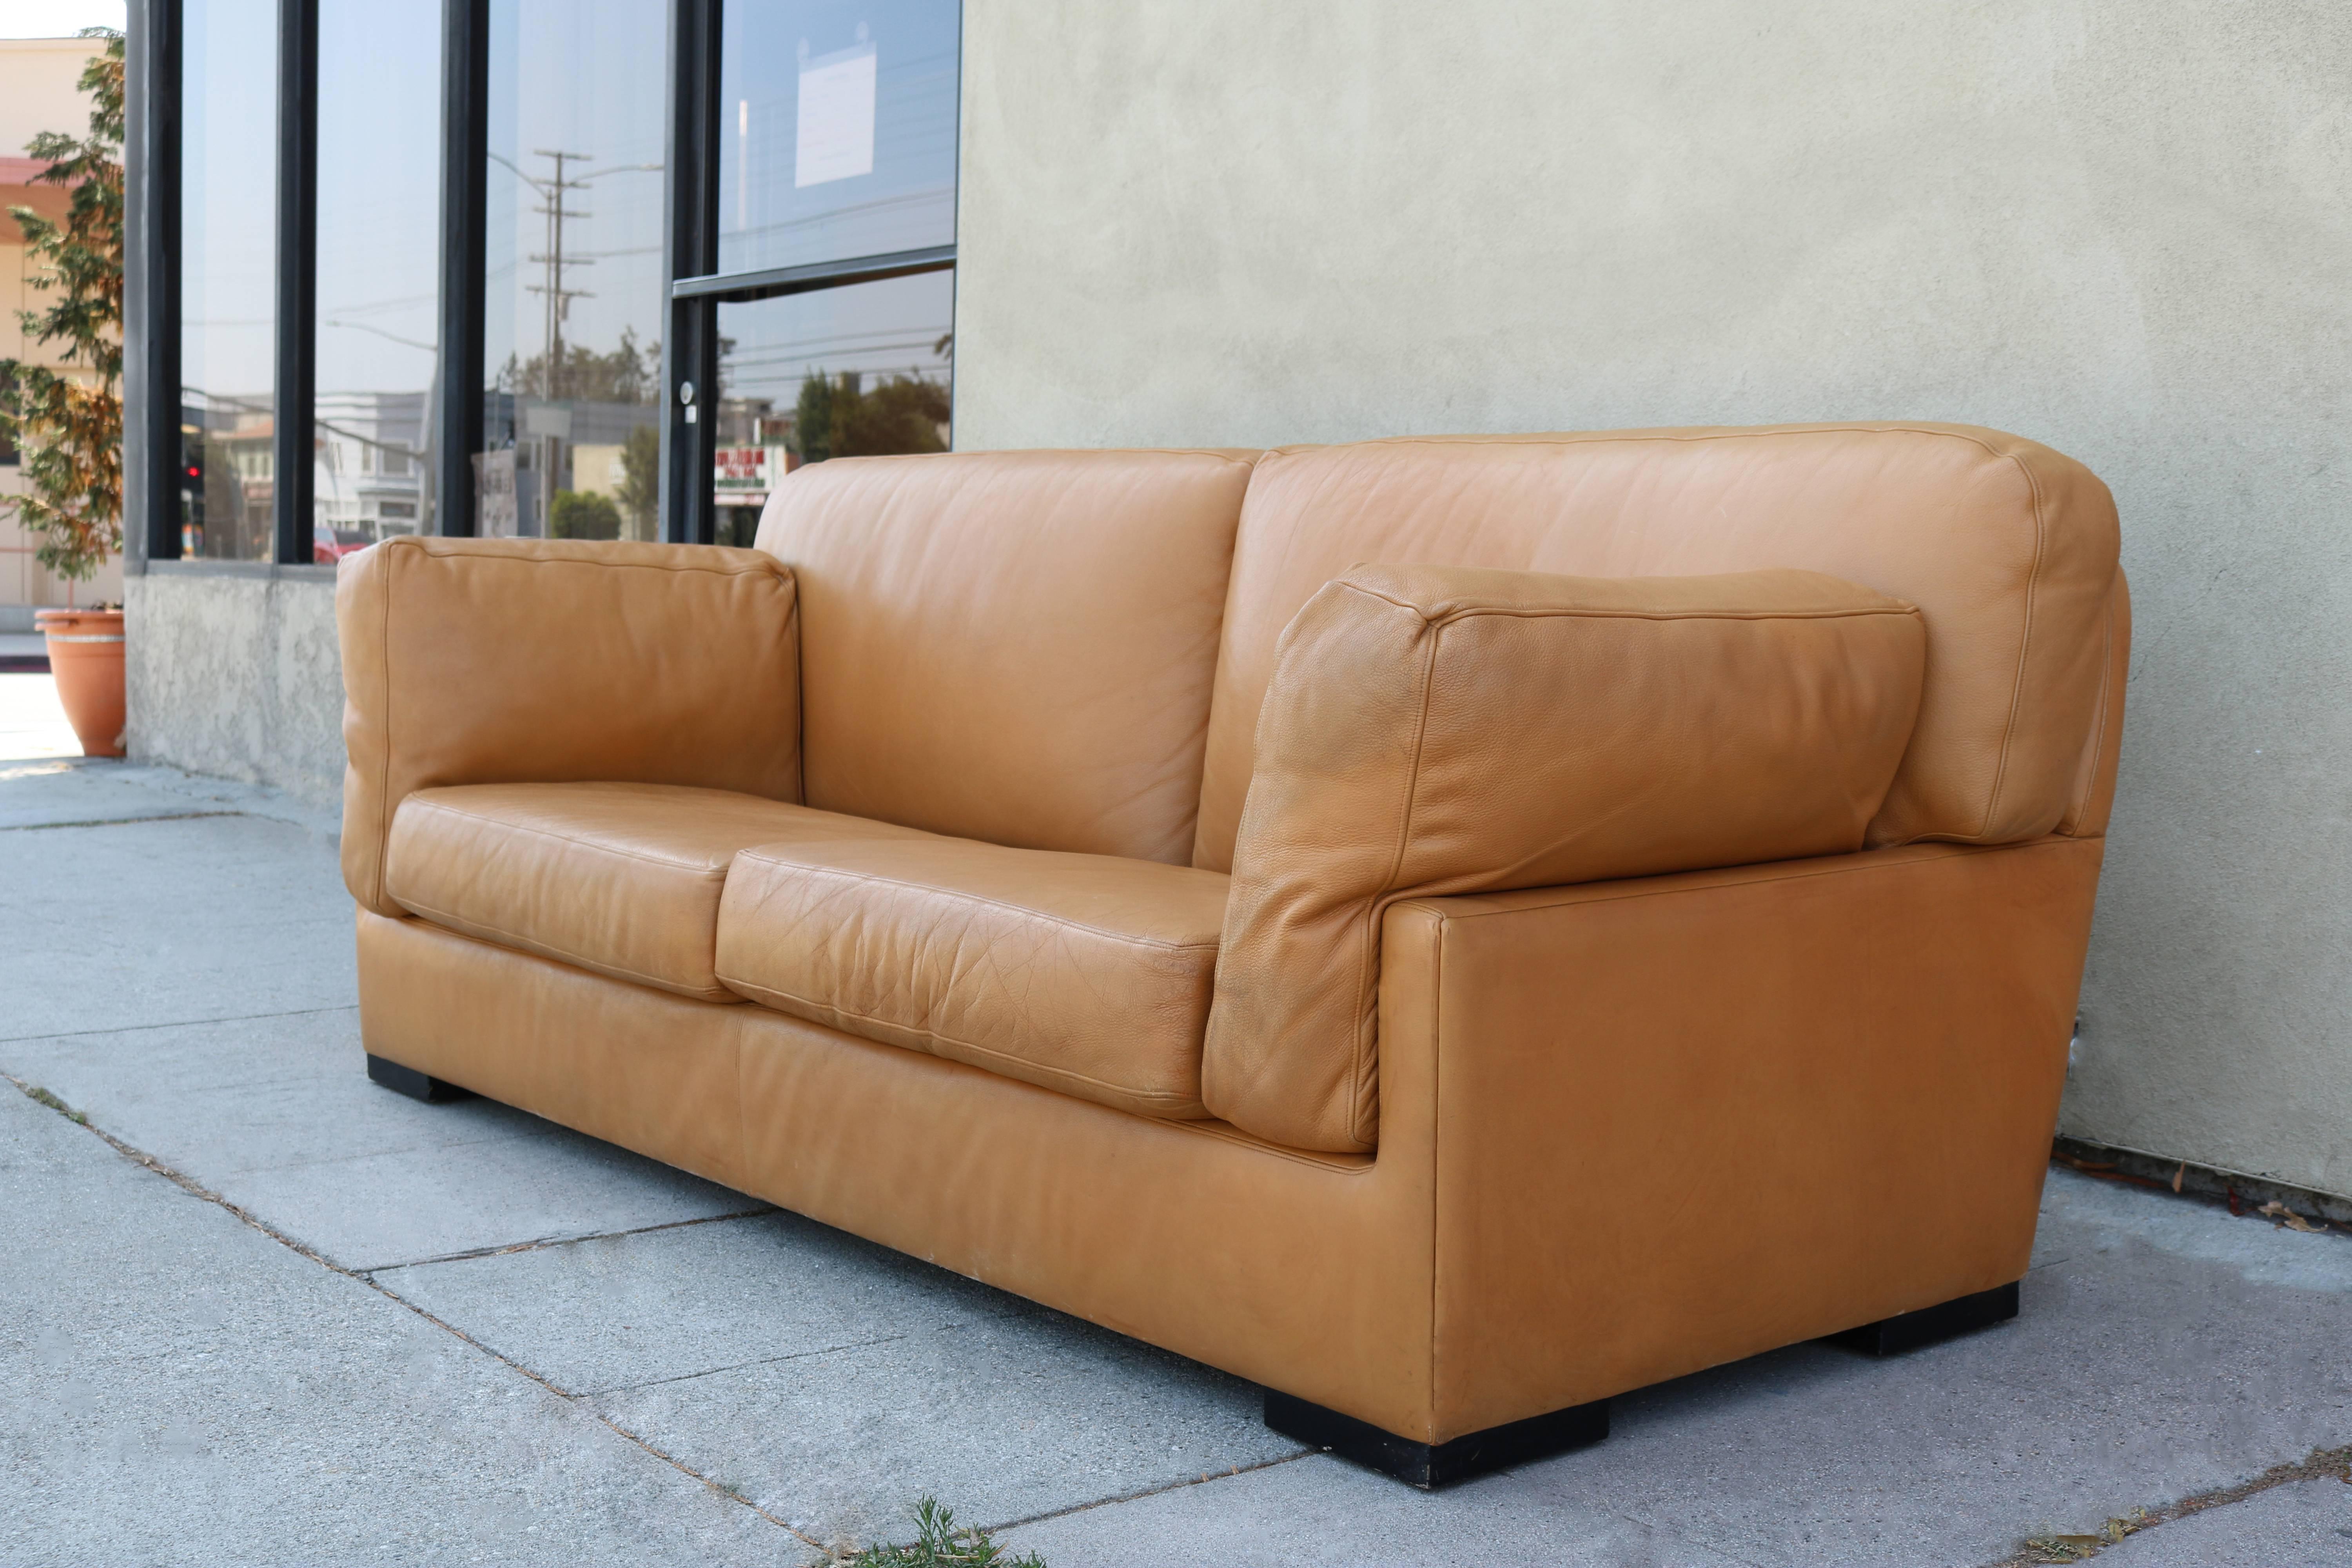 1970s era sofa covered in a warm, butterscotch colored thick and soft leather. It sits on four black square feet. Cushions have been newly re stuffed.